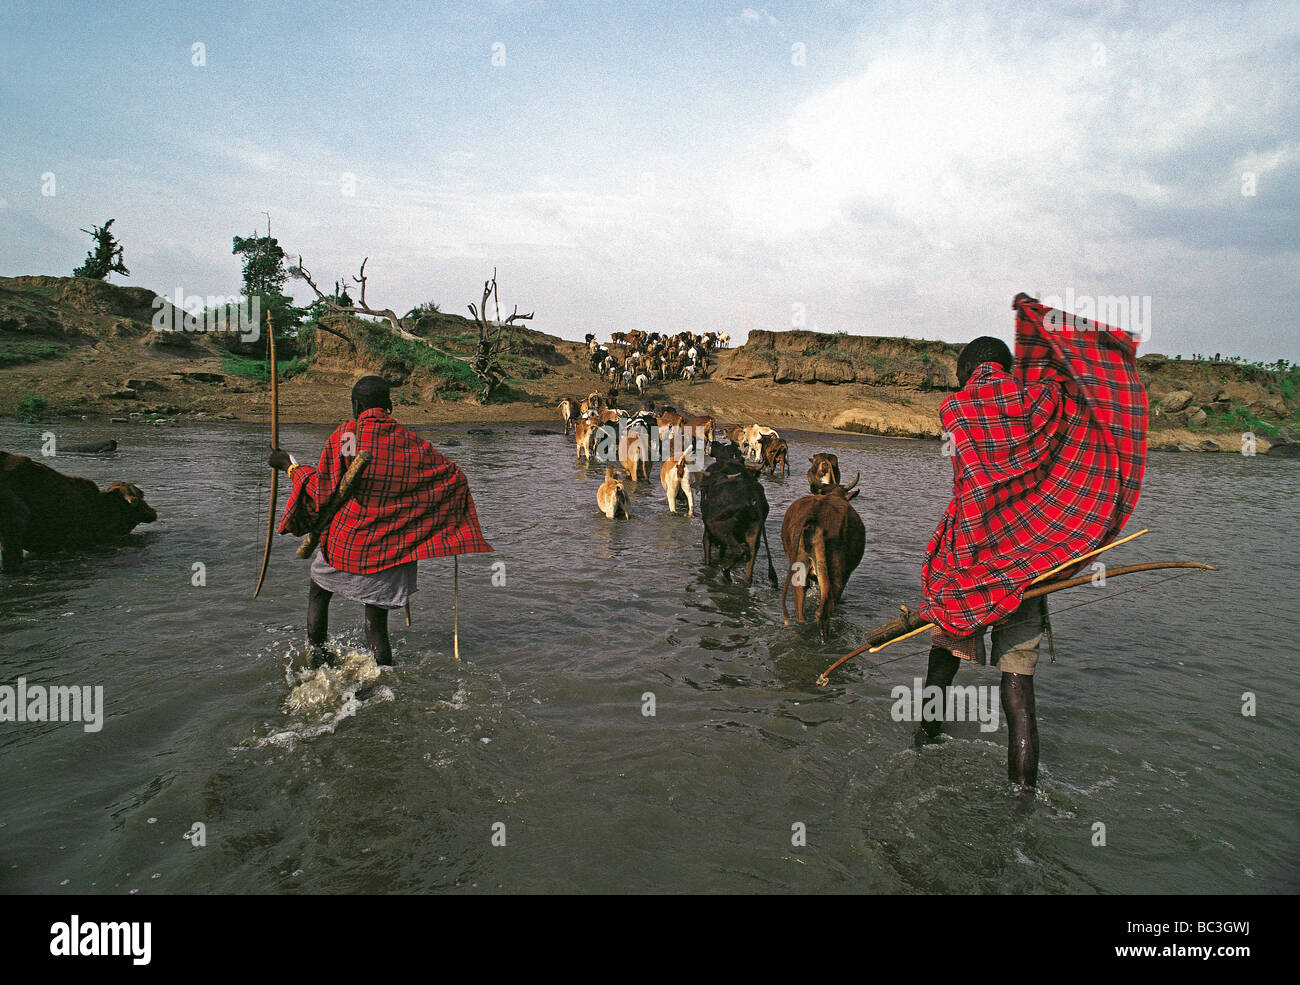 Maasai warriors armed with bows and arrows escorting their cattle across the Mara river Kenya East Africa Stock Photo